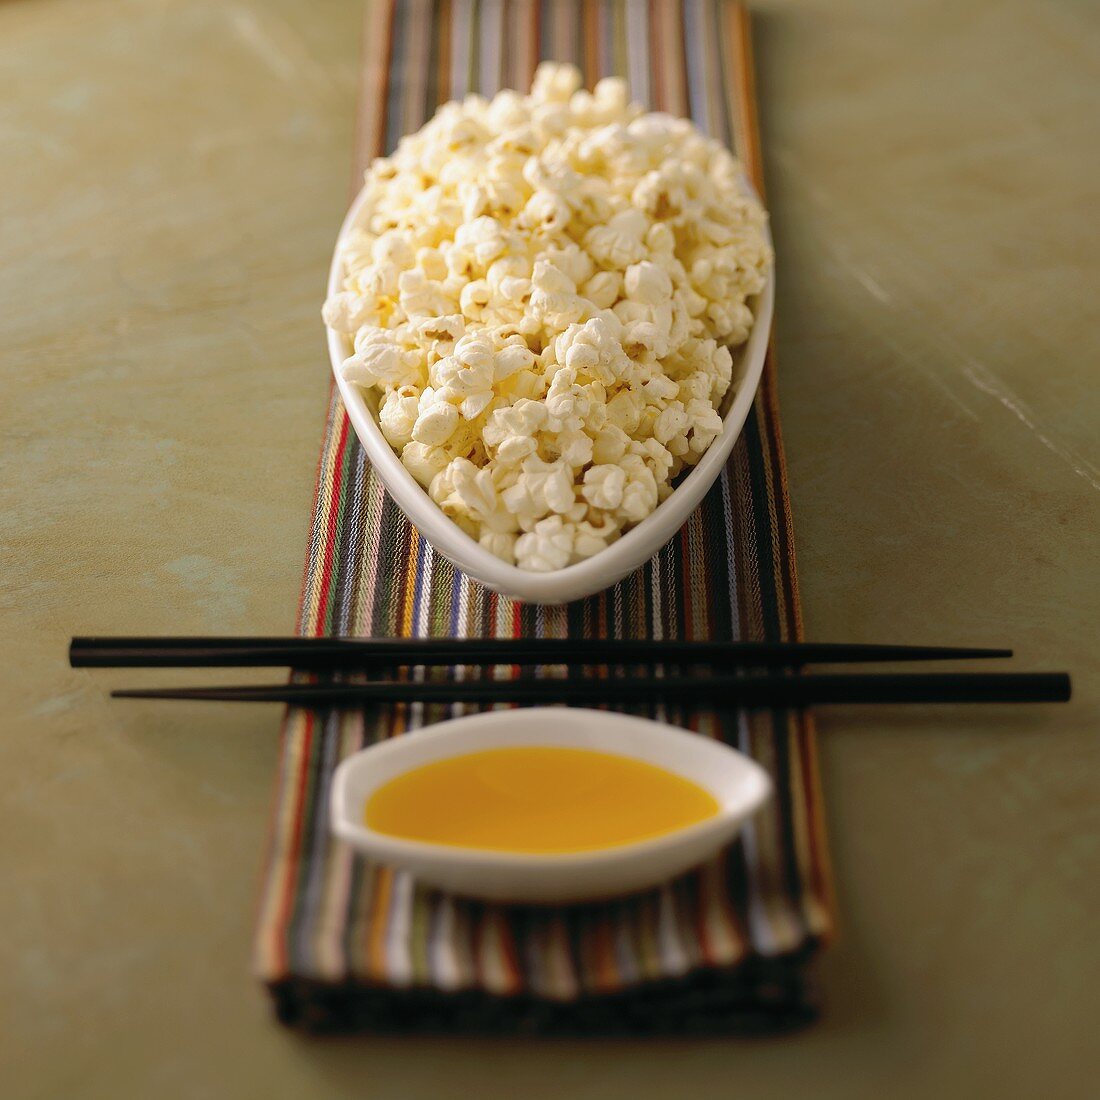 A Bowl of Popcorn with Melted Butter and Chopsticks